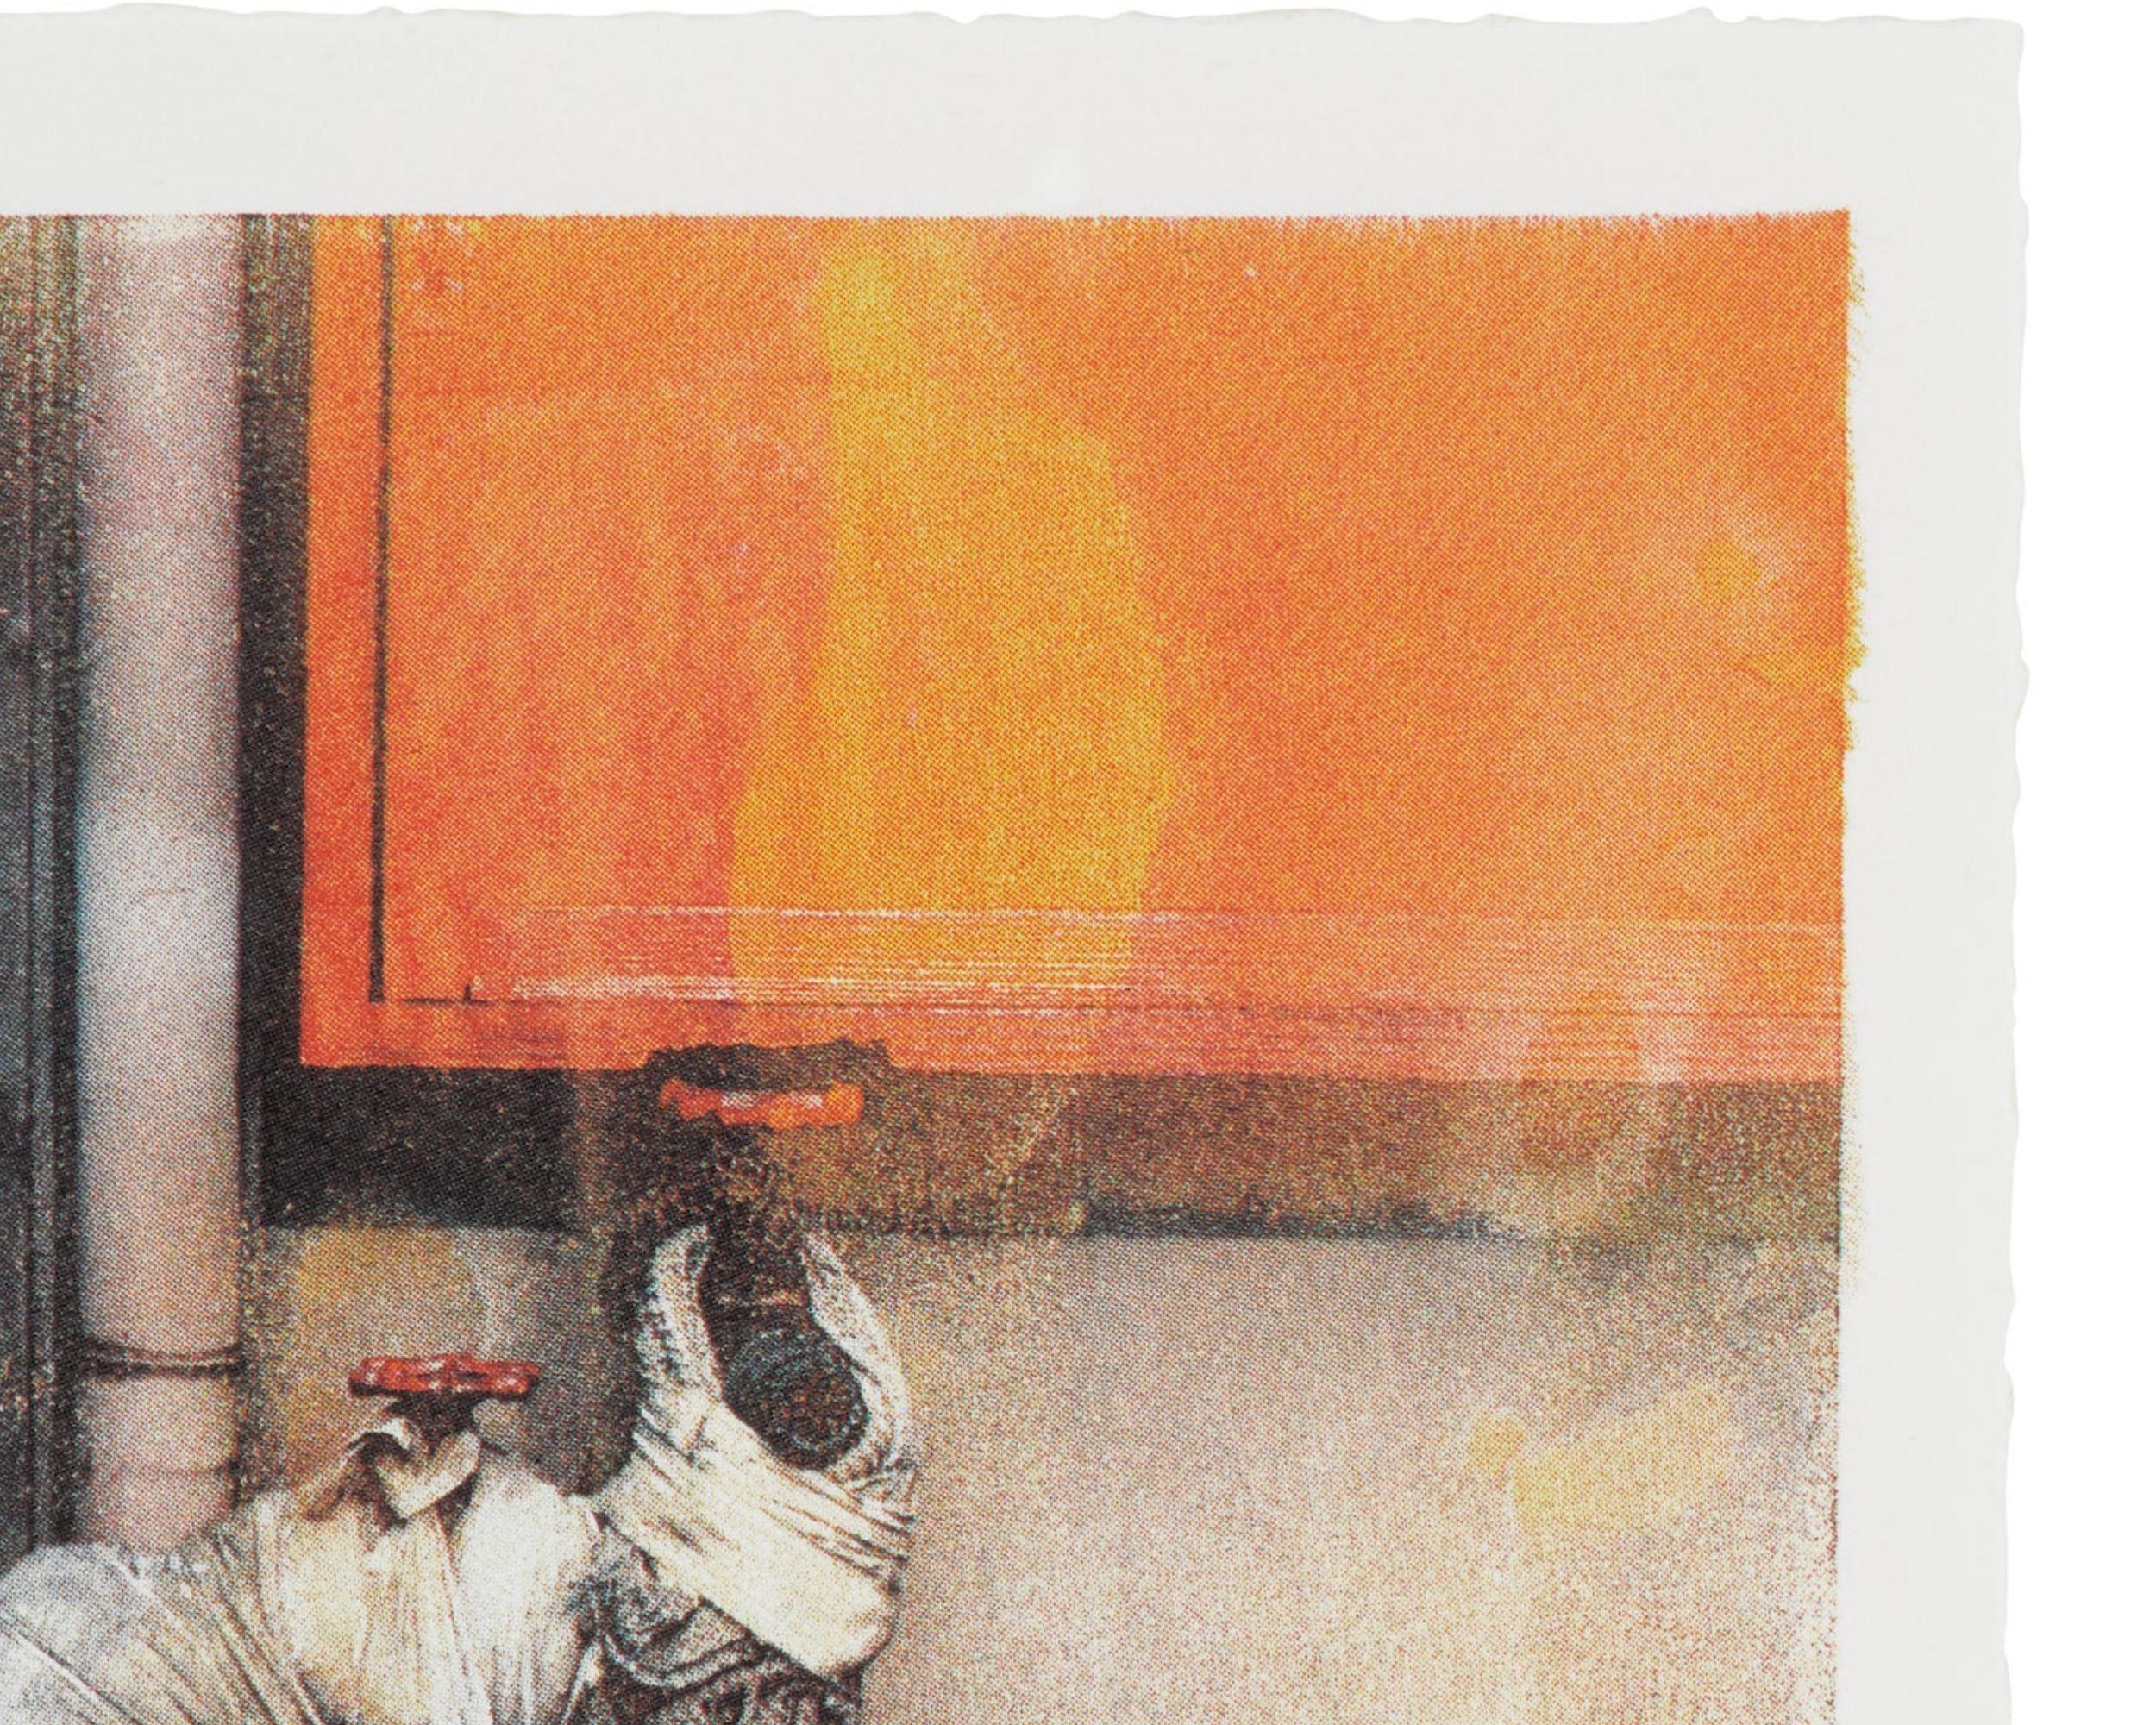 Tap, 2004
Robert Rauschenberg
Lithograph in colours, on Rives BFK wove paper
Signed, dated and numbered from the edition of 180
From Artists Coming Together to Benefit Democratic Presidential Candidates (ACT)
Printed and published by Gemini G.E.L.,